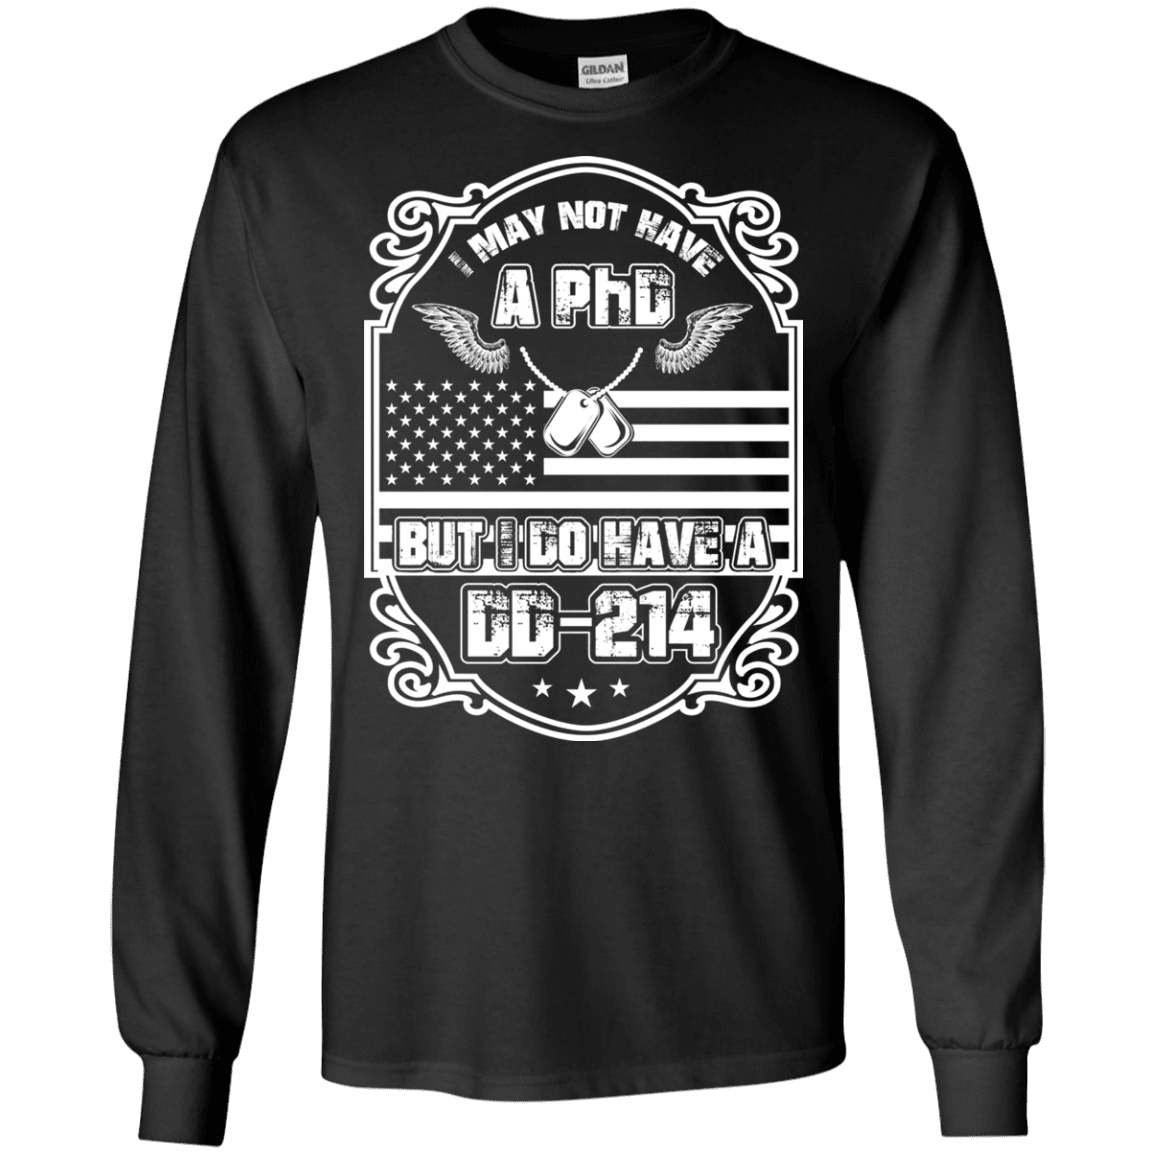 Military T-Shirt "I MAY NOT HAVE A PhD BUT I HAVE DD214"-TShirt-General-Veterans Nation